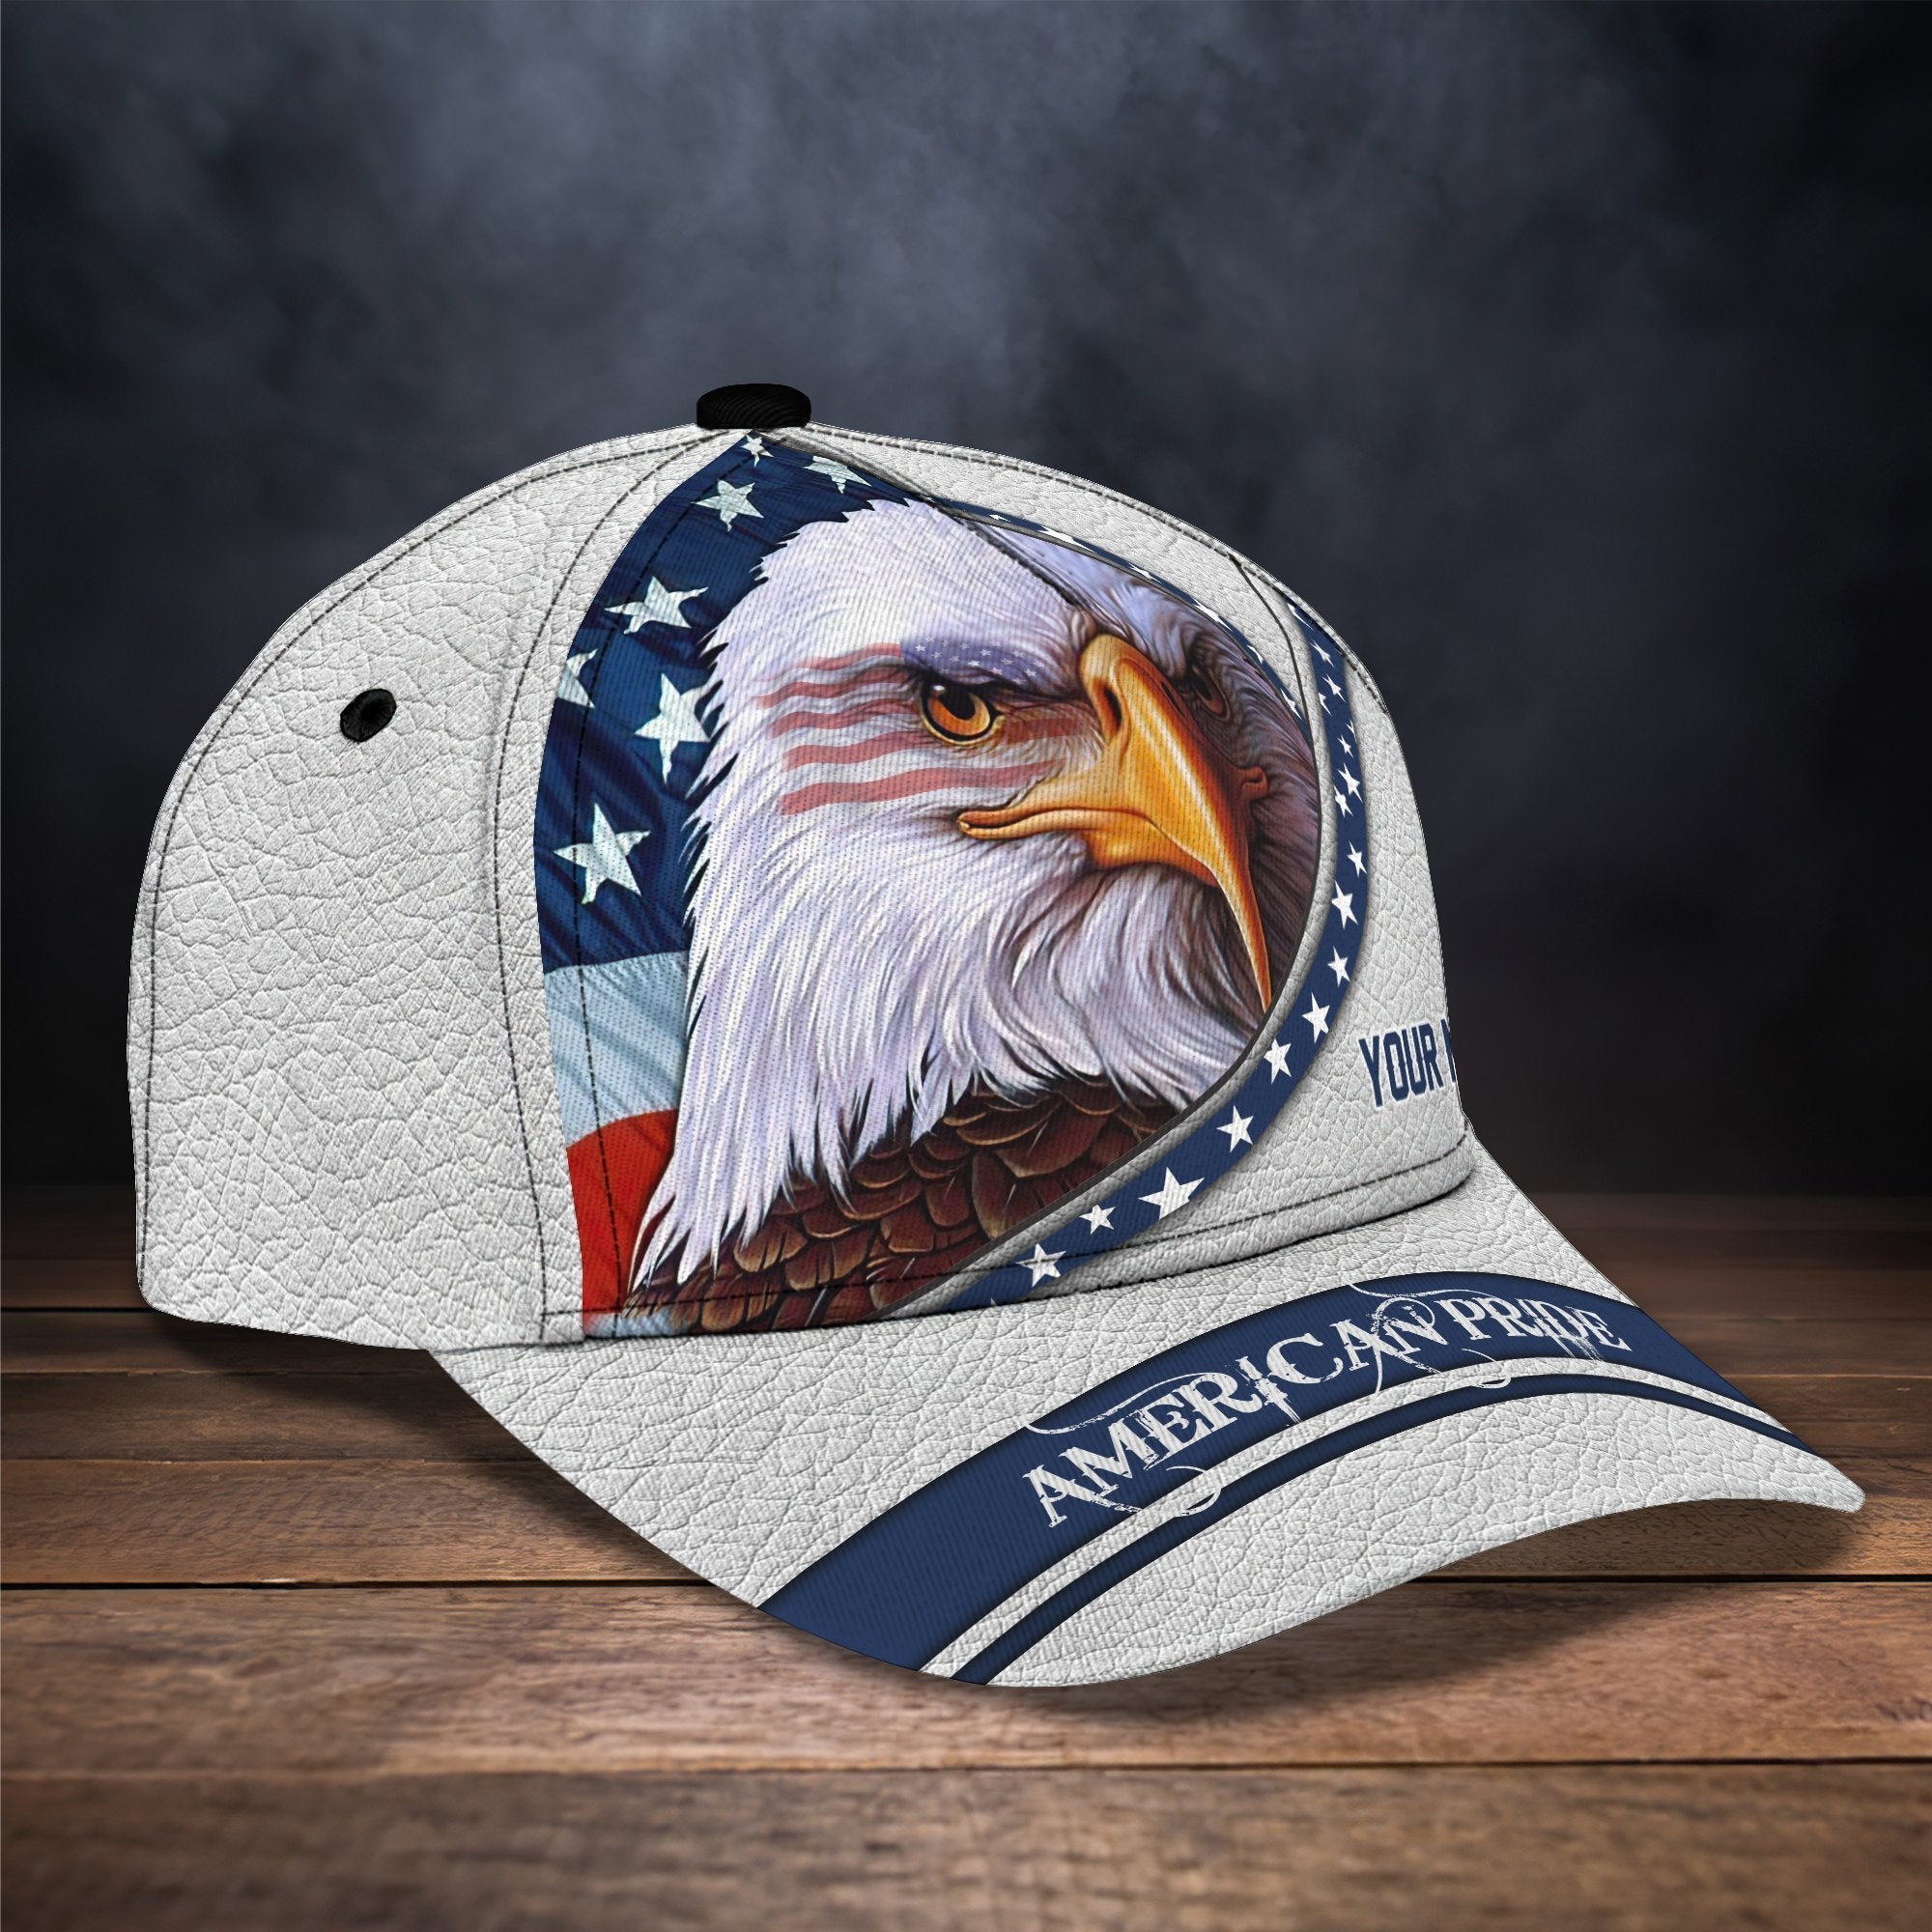 Eagle 01 - Personalized Name Cap - TD96